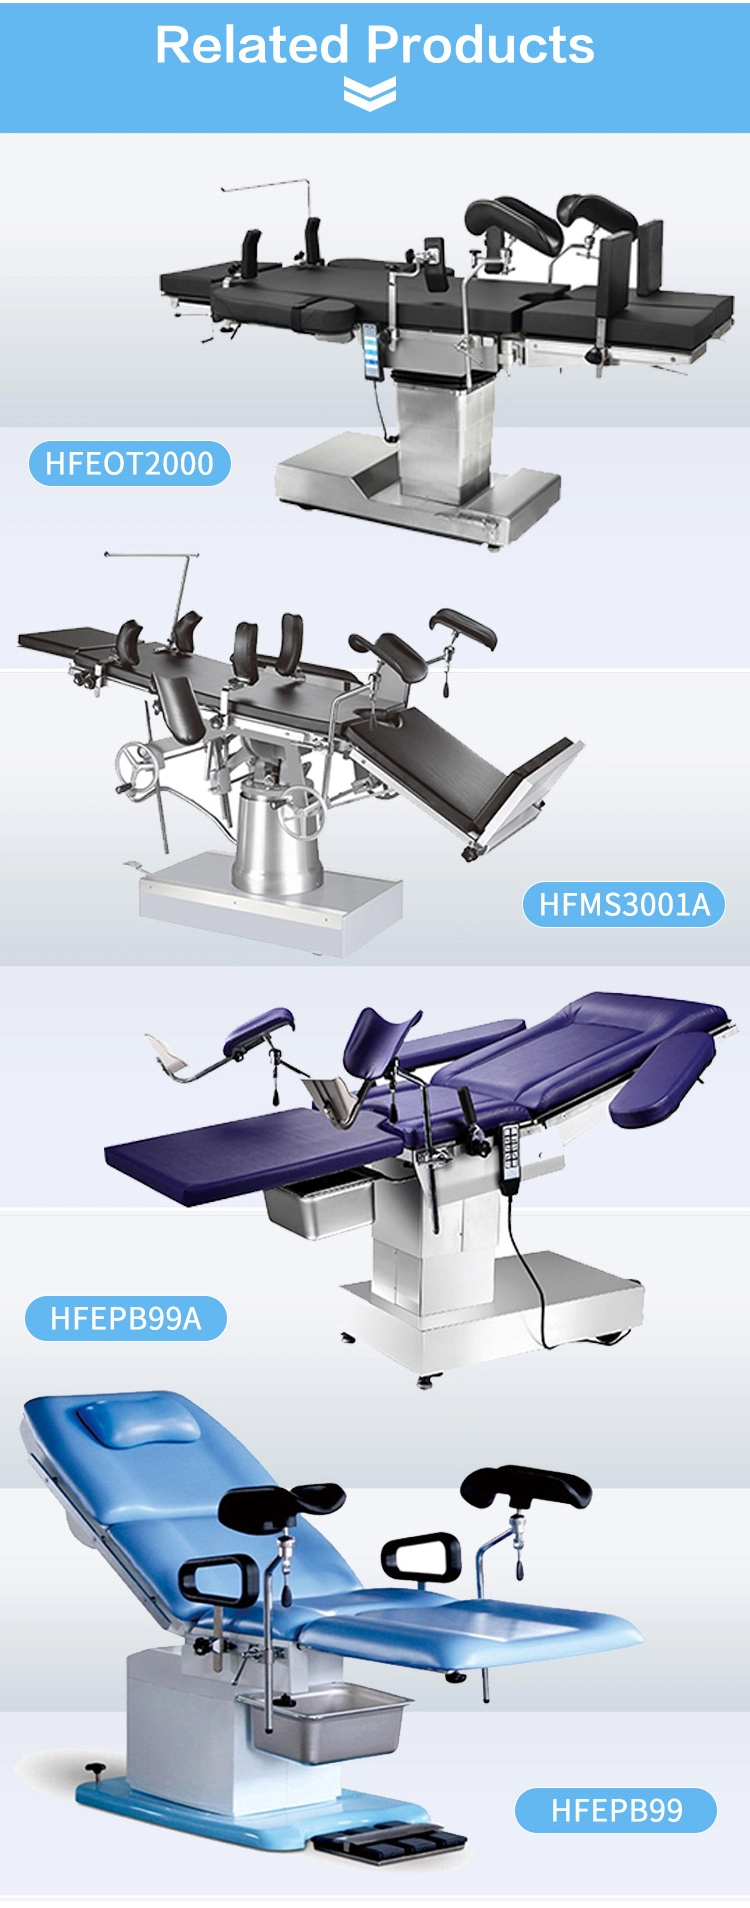 Factory Price Hospital Equipment List Hydraulic Instruments Operating Table (HFMH3008AB)